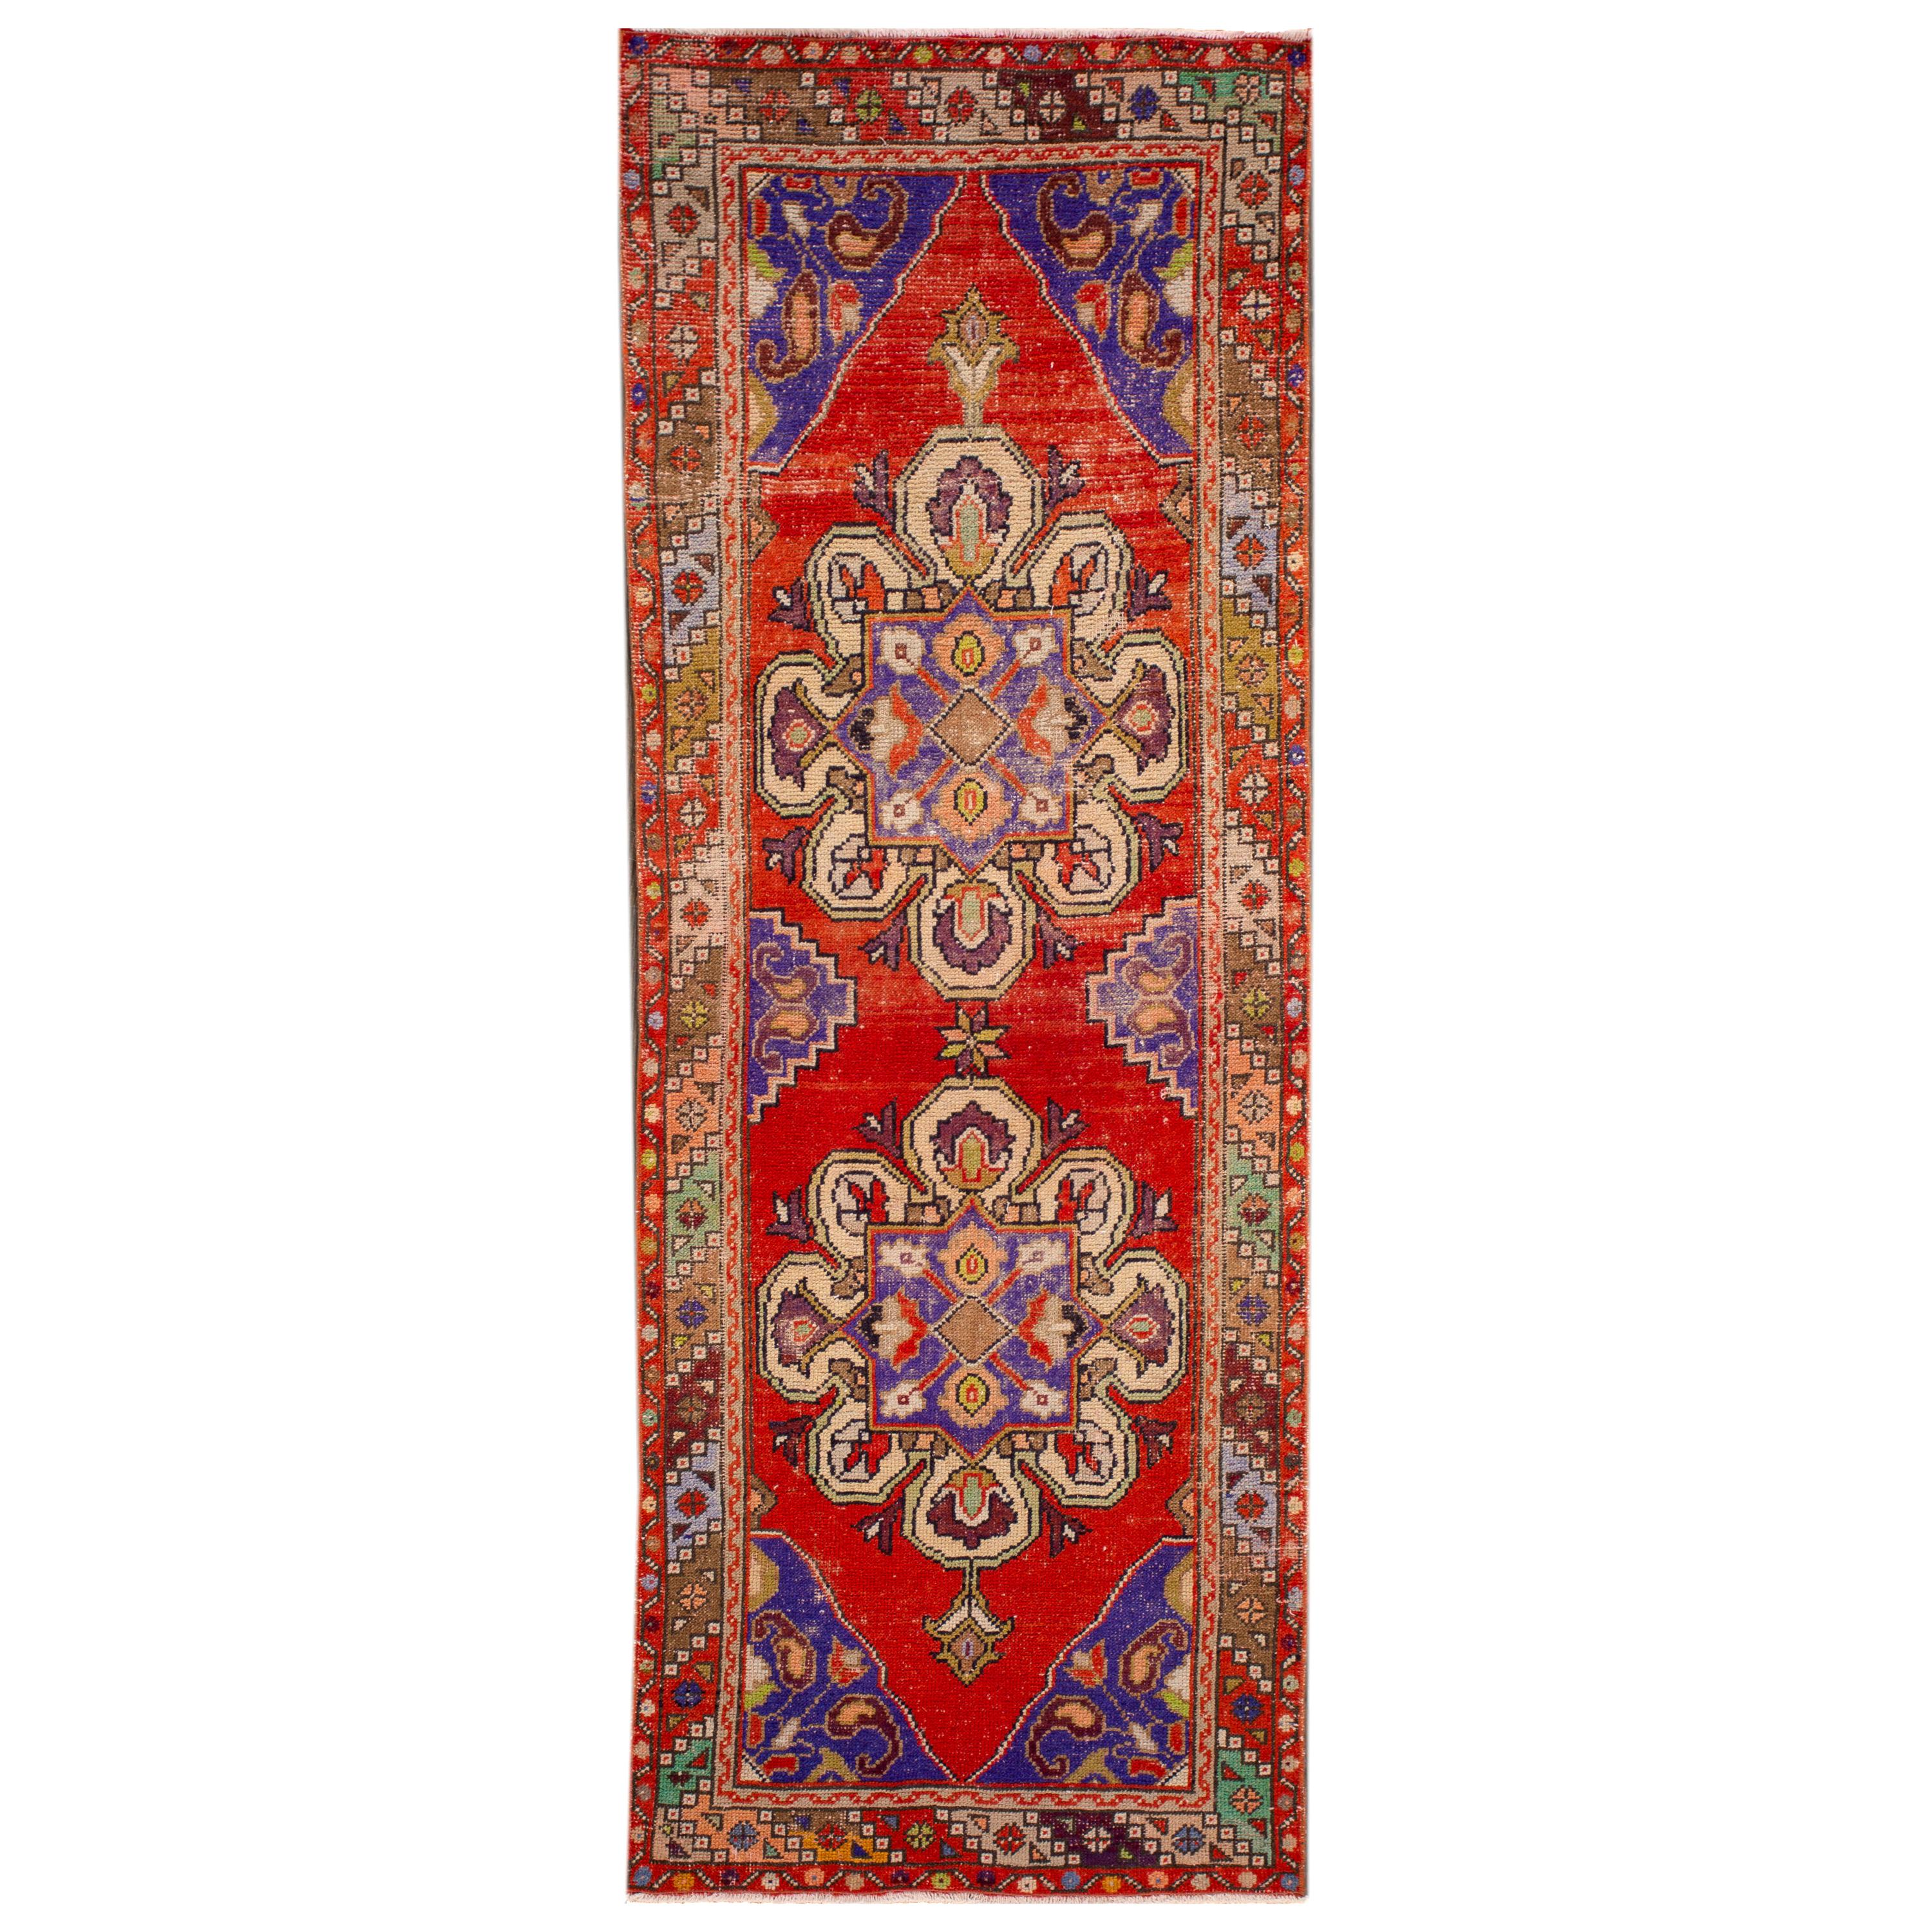 Early 20th Century Vintage Turkish Wool Runner Rug For Sale